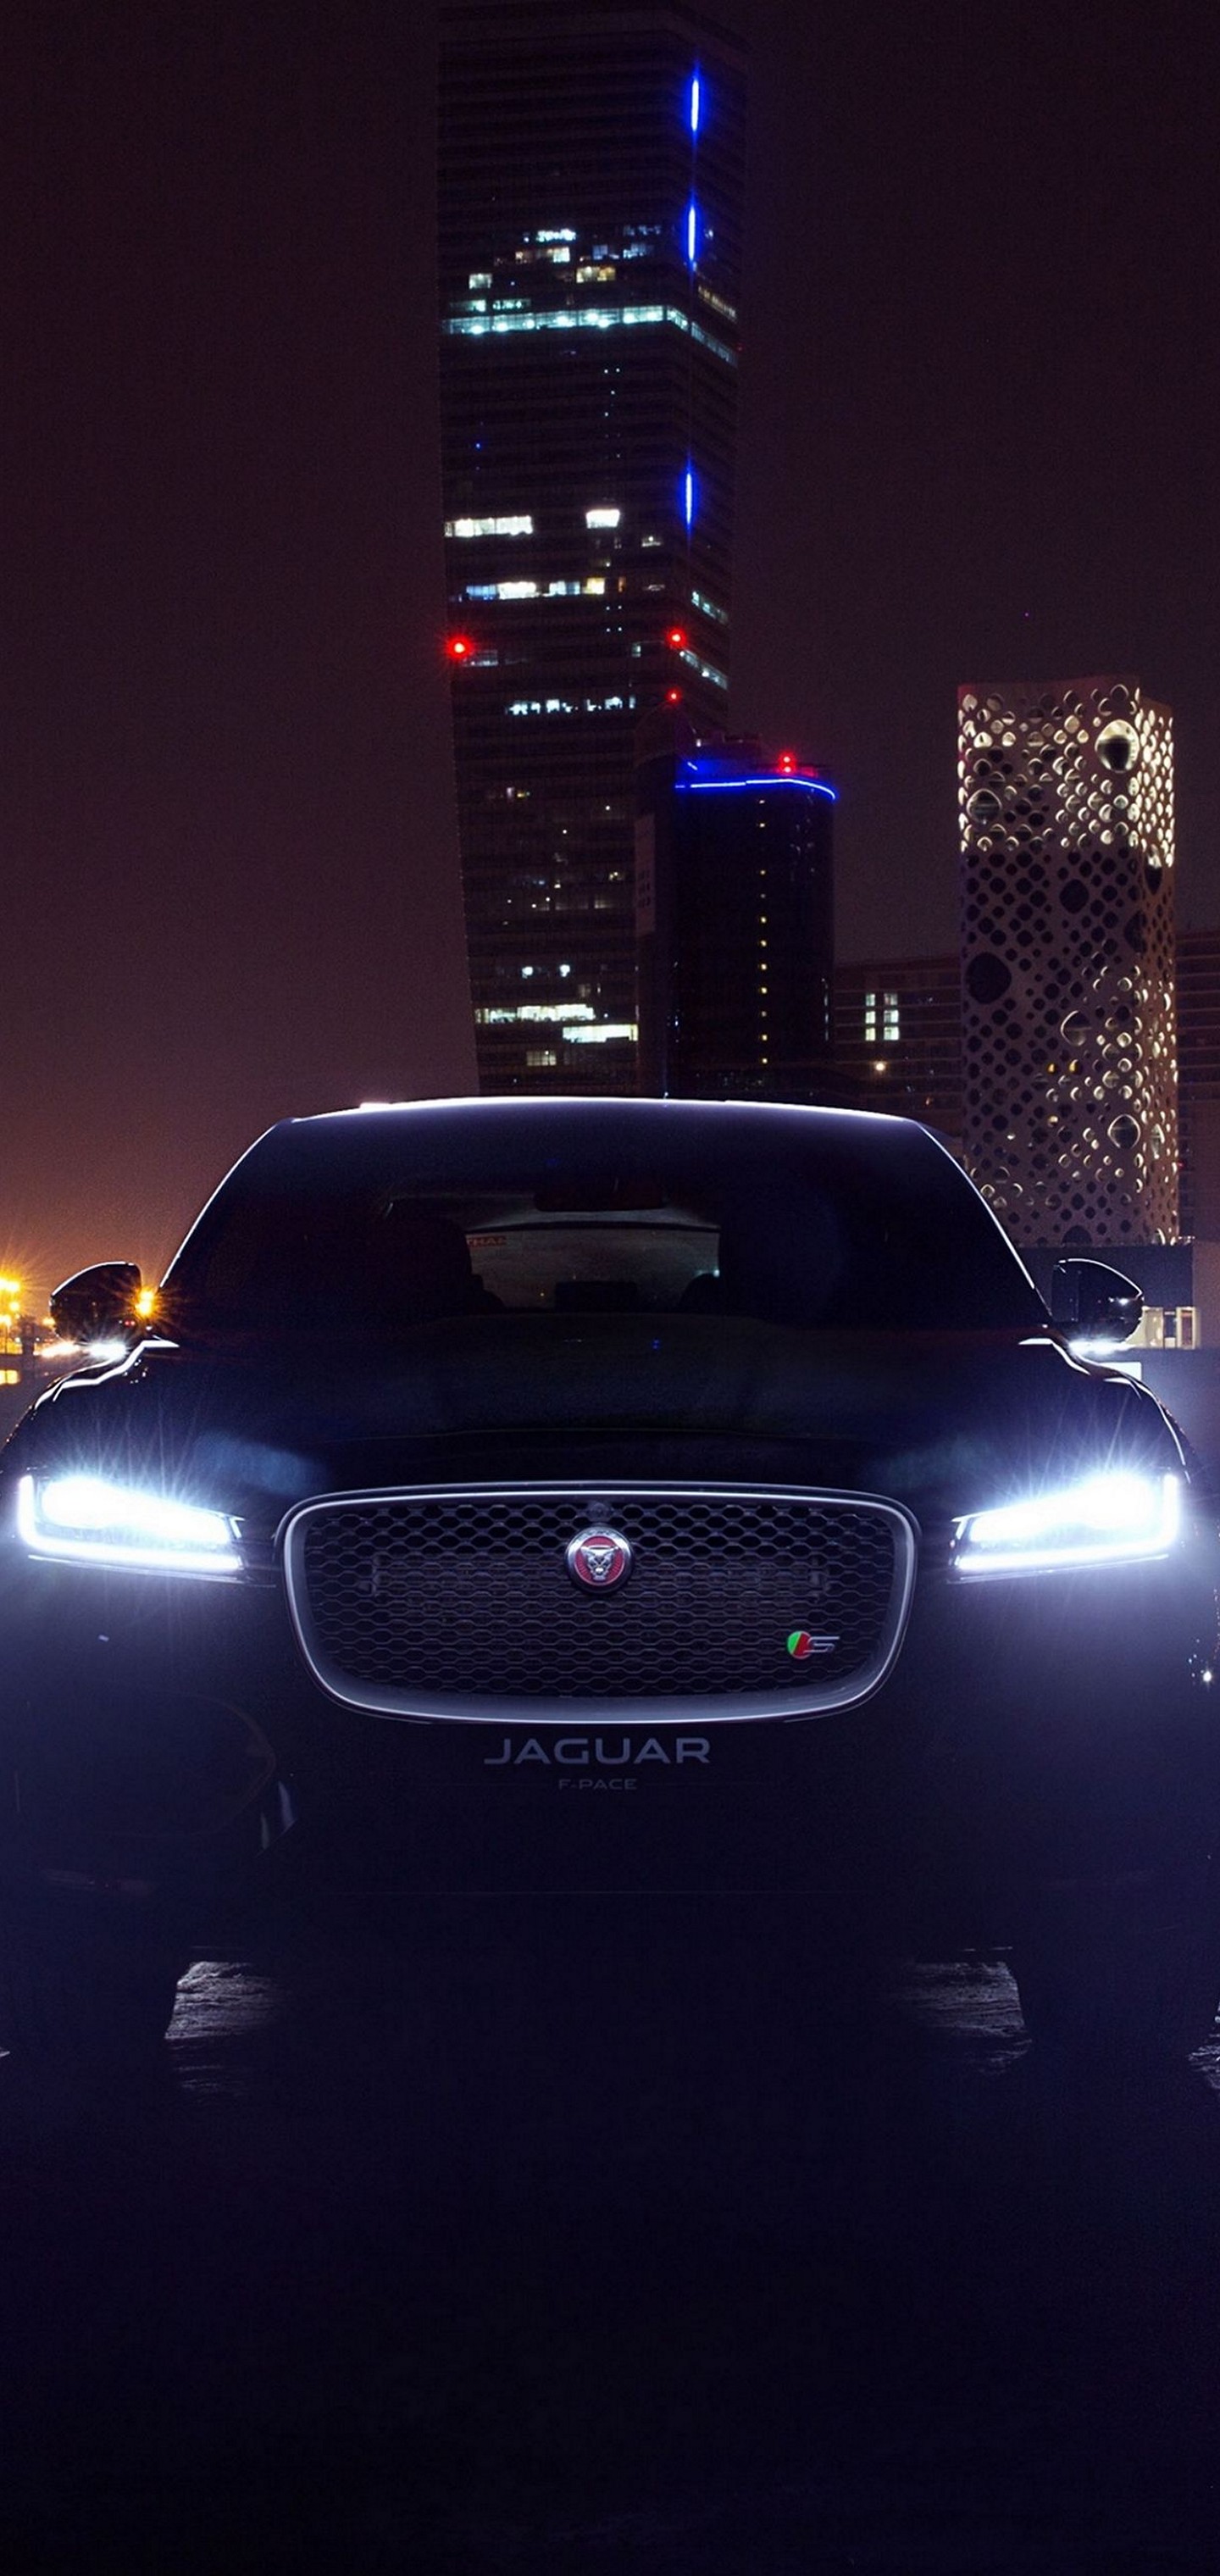 270 Jaguar HD Wallpapers and Backgrounds